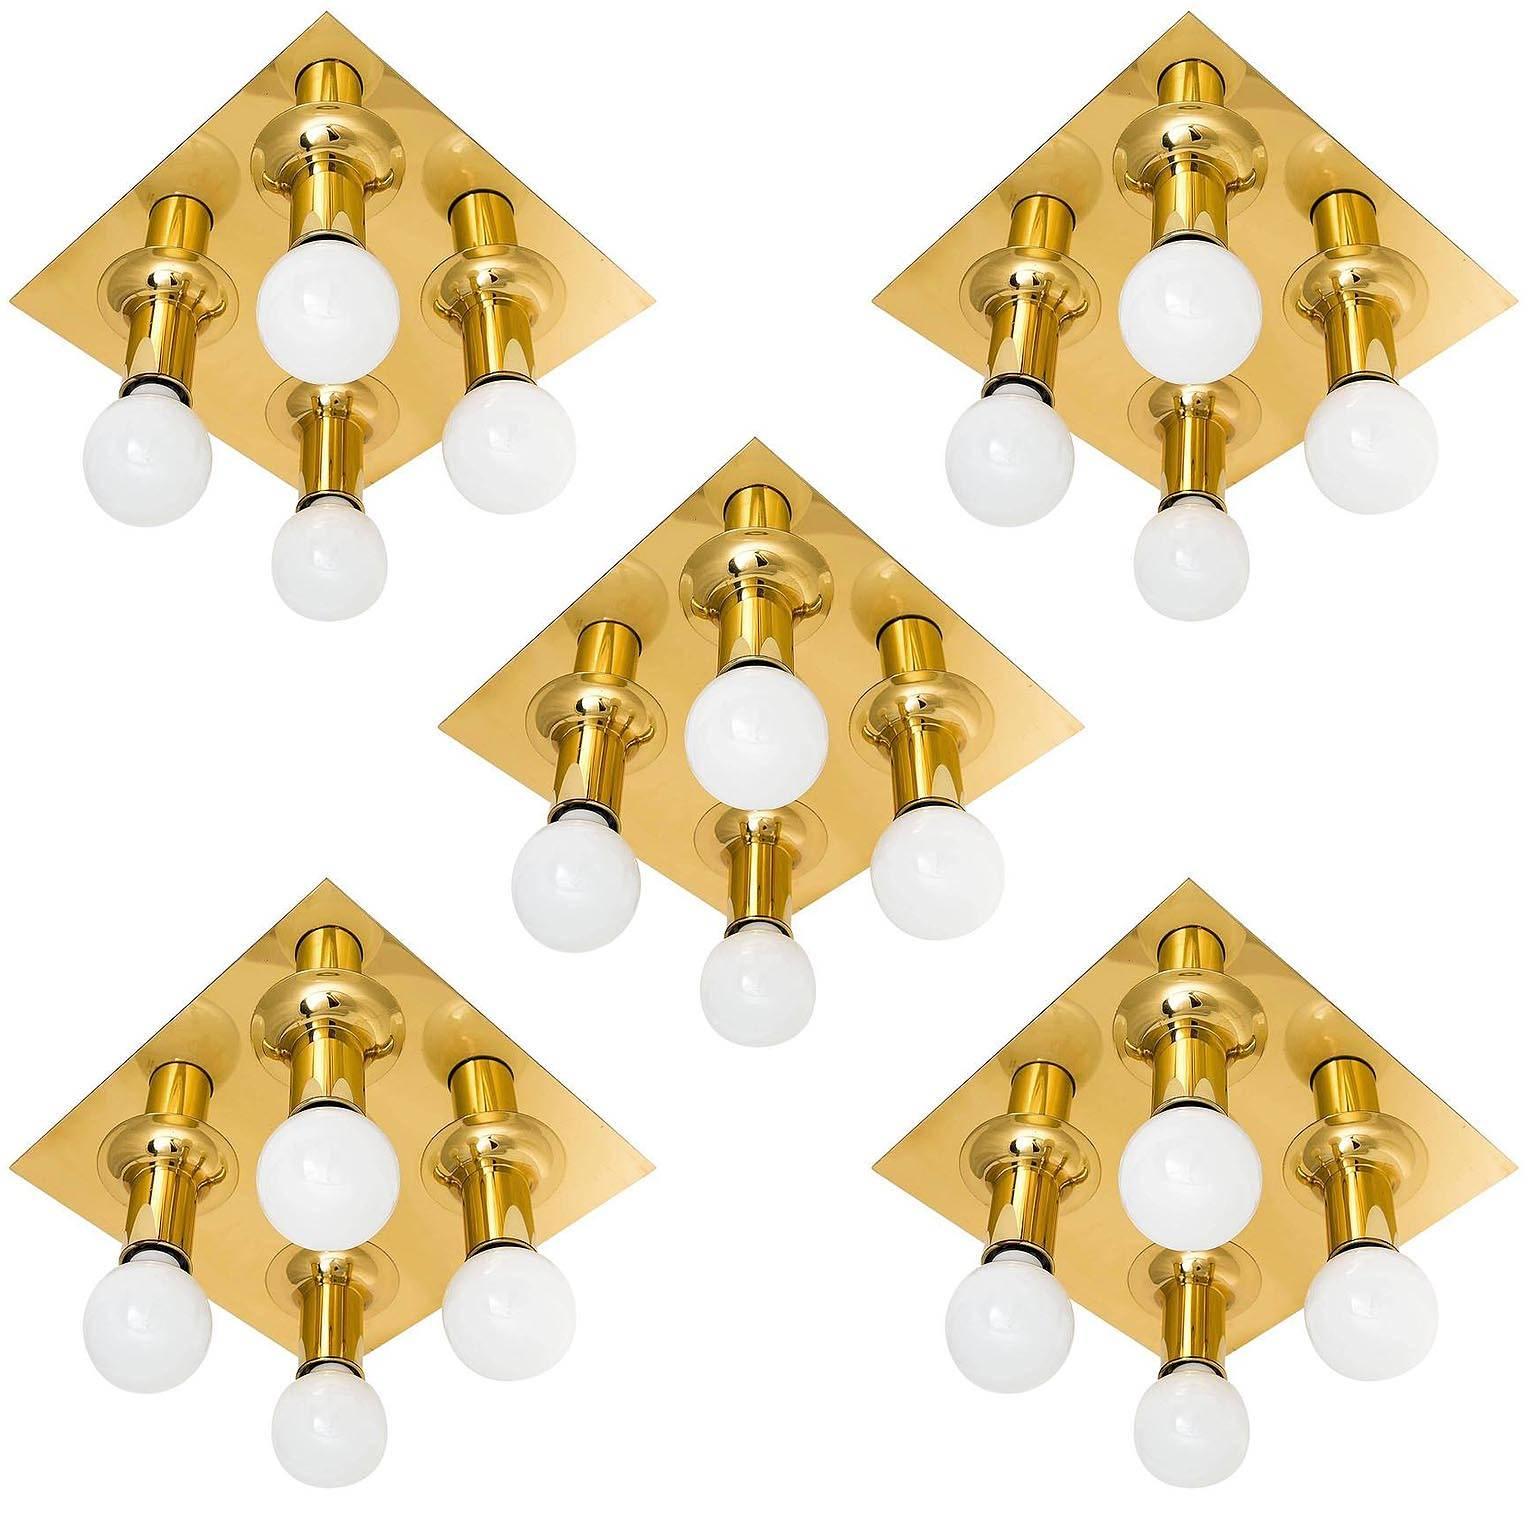 One of five polished brass light fixtures by Cosack, Germany, manufactured in Mid-Century, circa 1970 (at the end of 1960s and beginning of 1970s). They can be used as ceiling flush mounts or wall sconces.
They work fine with different kind of bulbs